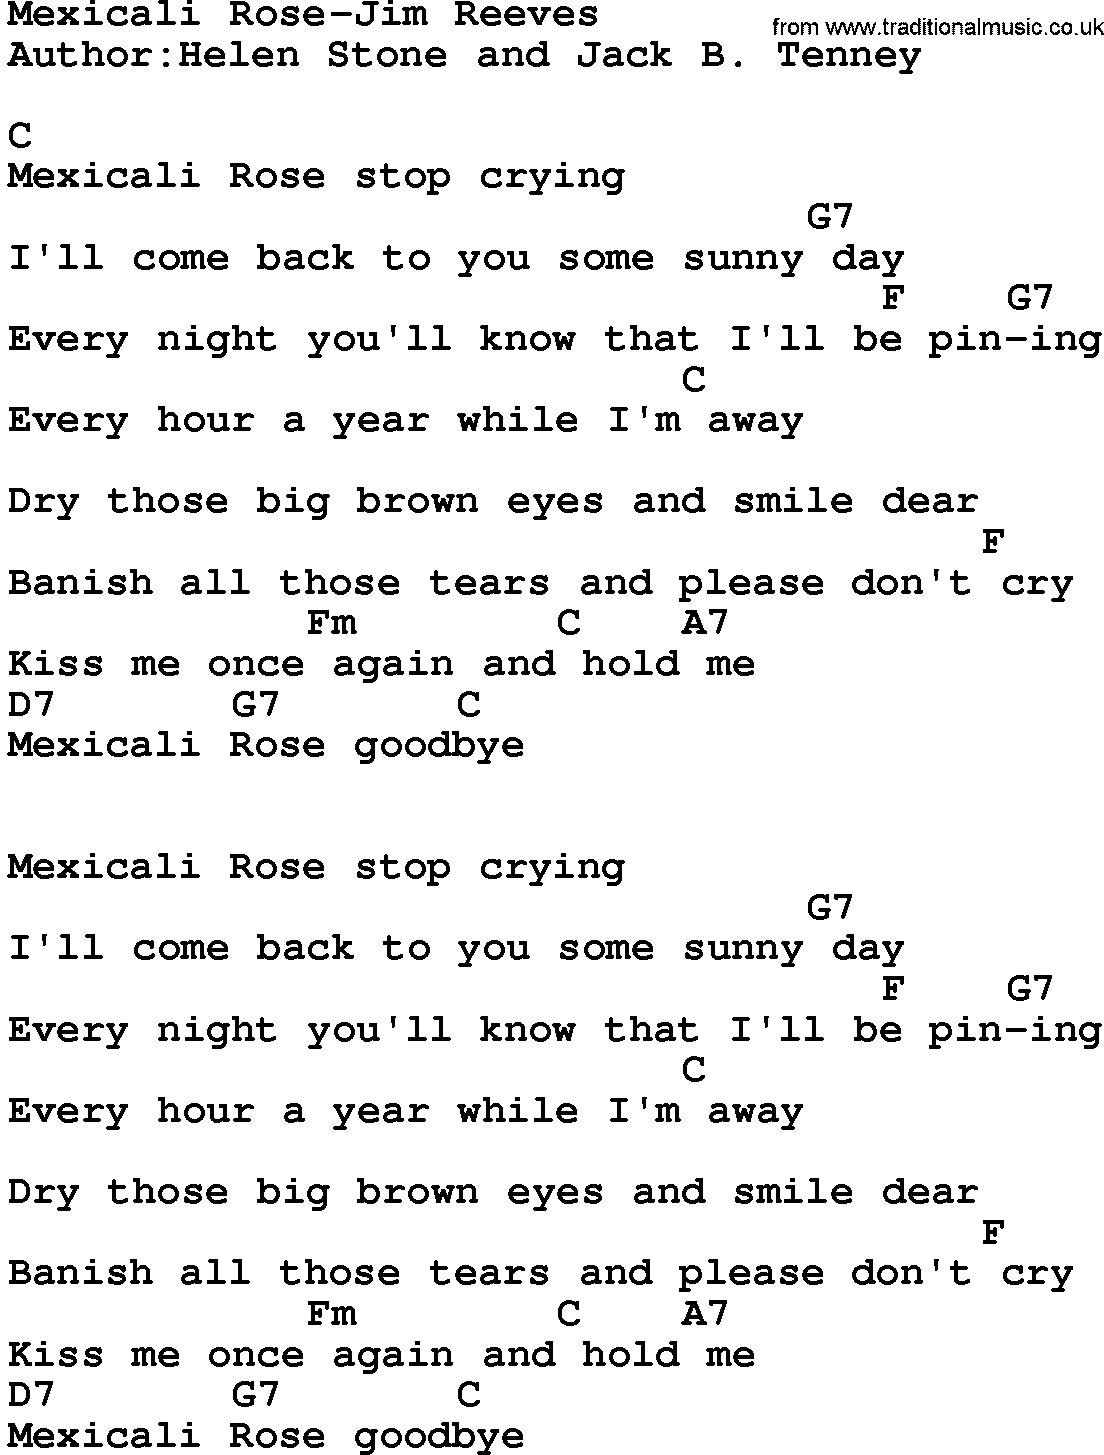 Country music song: Mexicali Rose-Jim Reeves  lyrics and chords